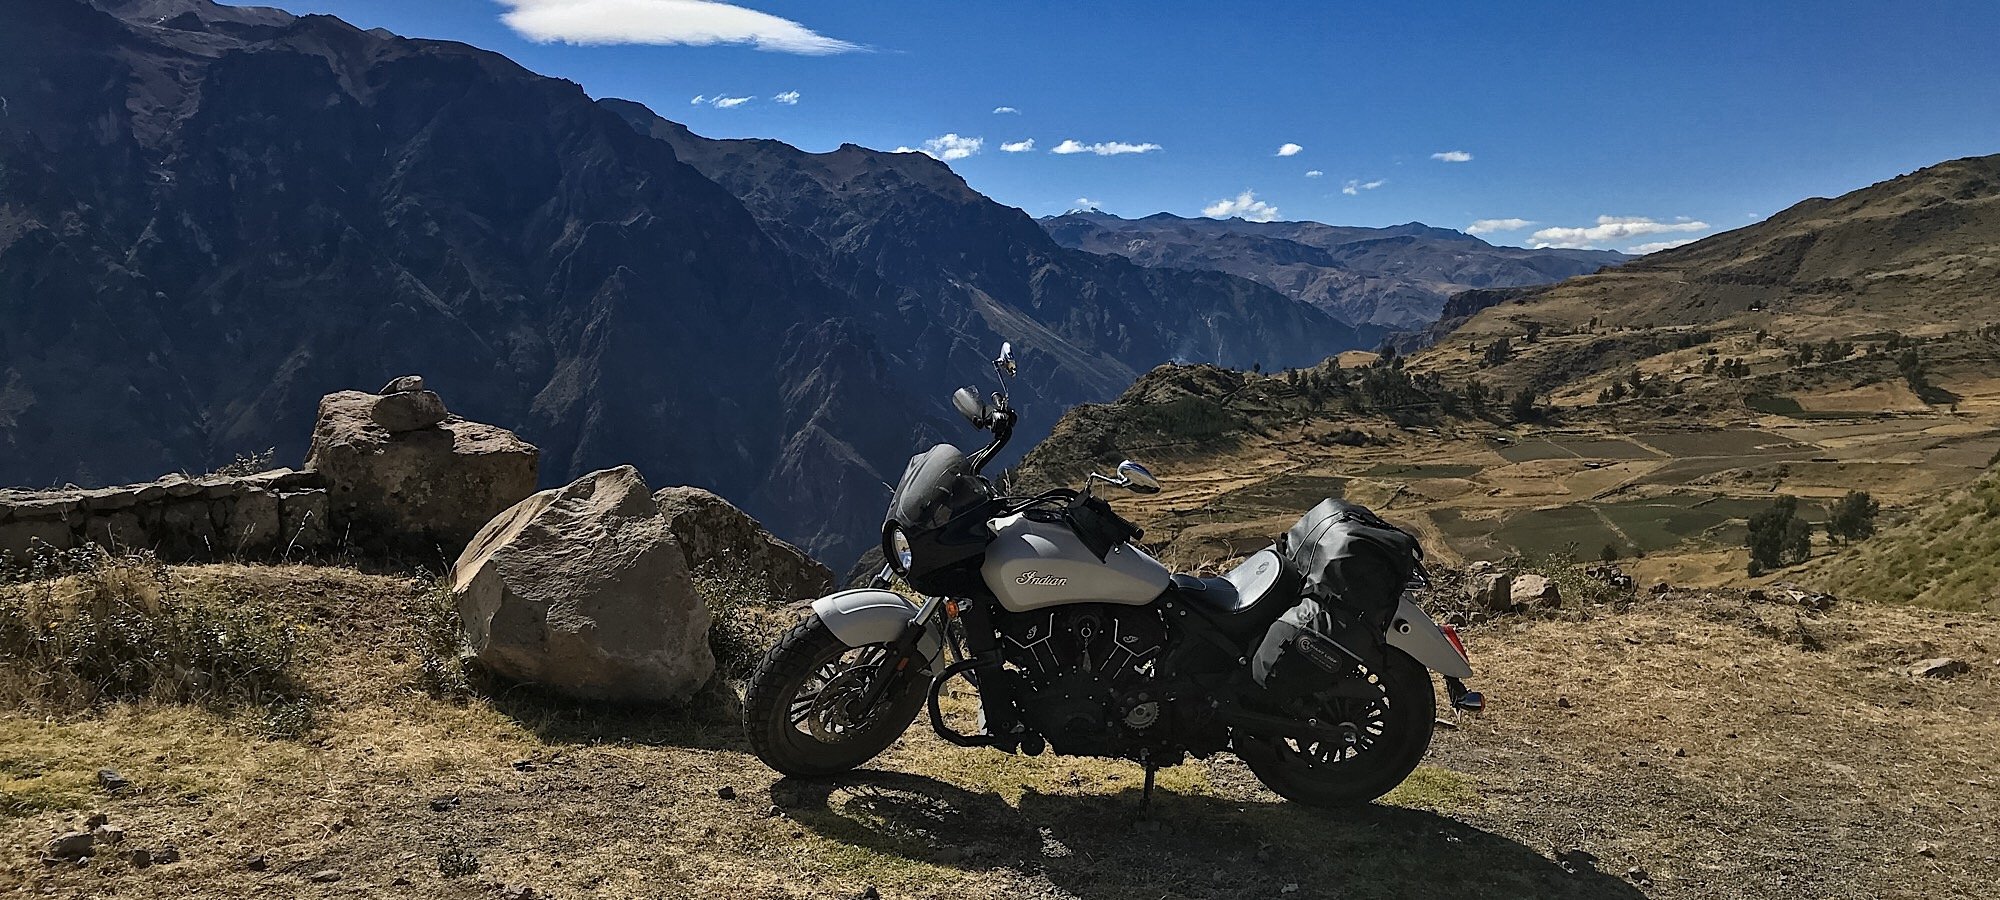 2019-Epic-Riding-in-Peru:-Arequipa-and-the-Colca Canyon-lead.jpg 2019-Epic-Riding-in-Peru:-Arequipa-and-the-Colca Canyon-lead.jpg